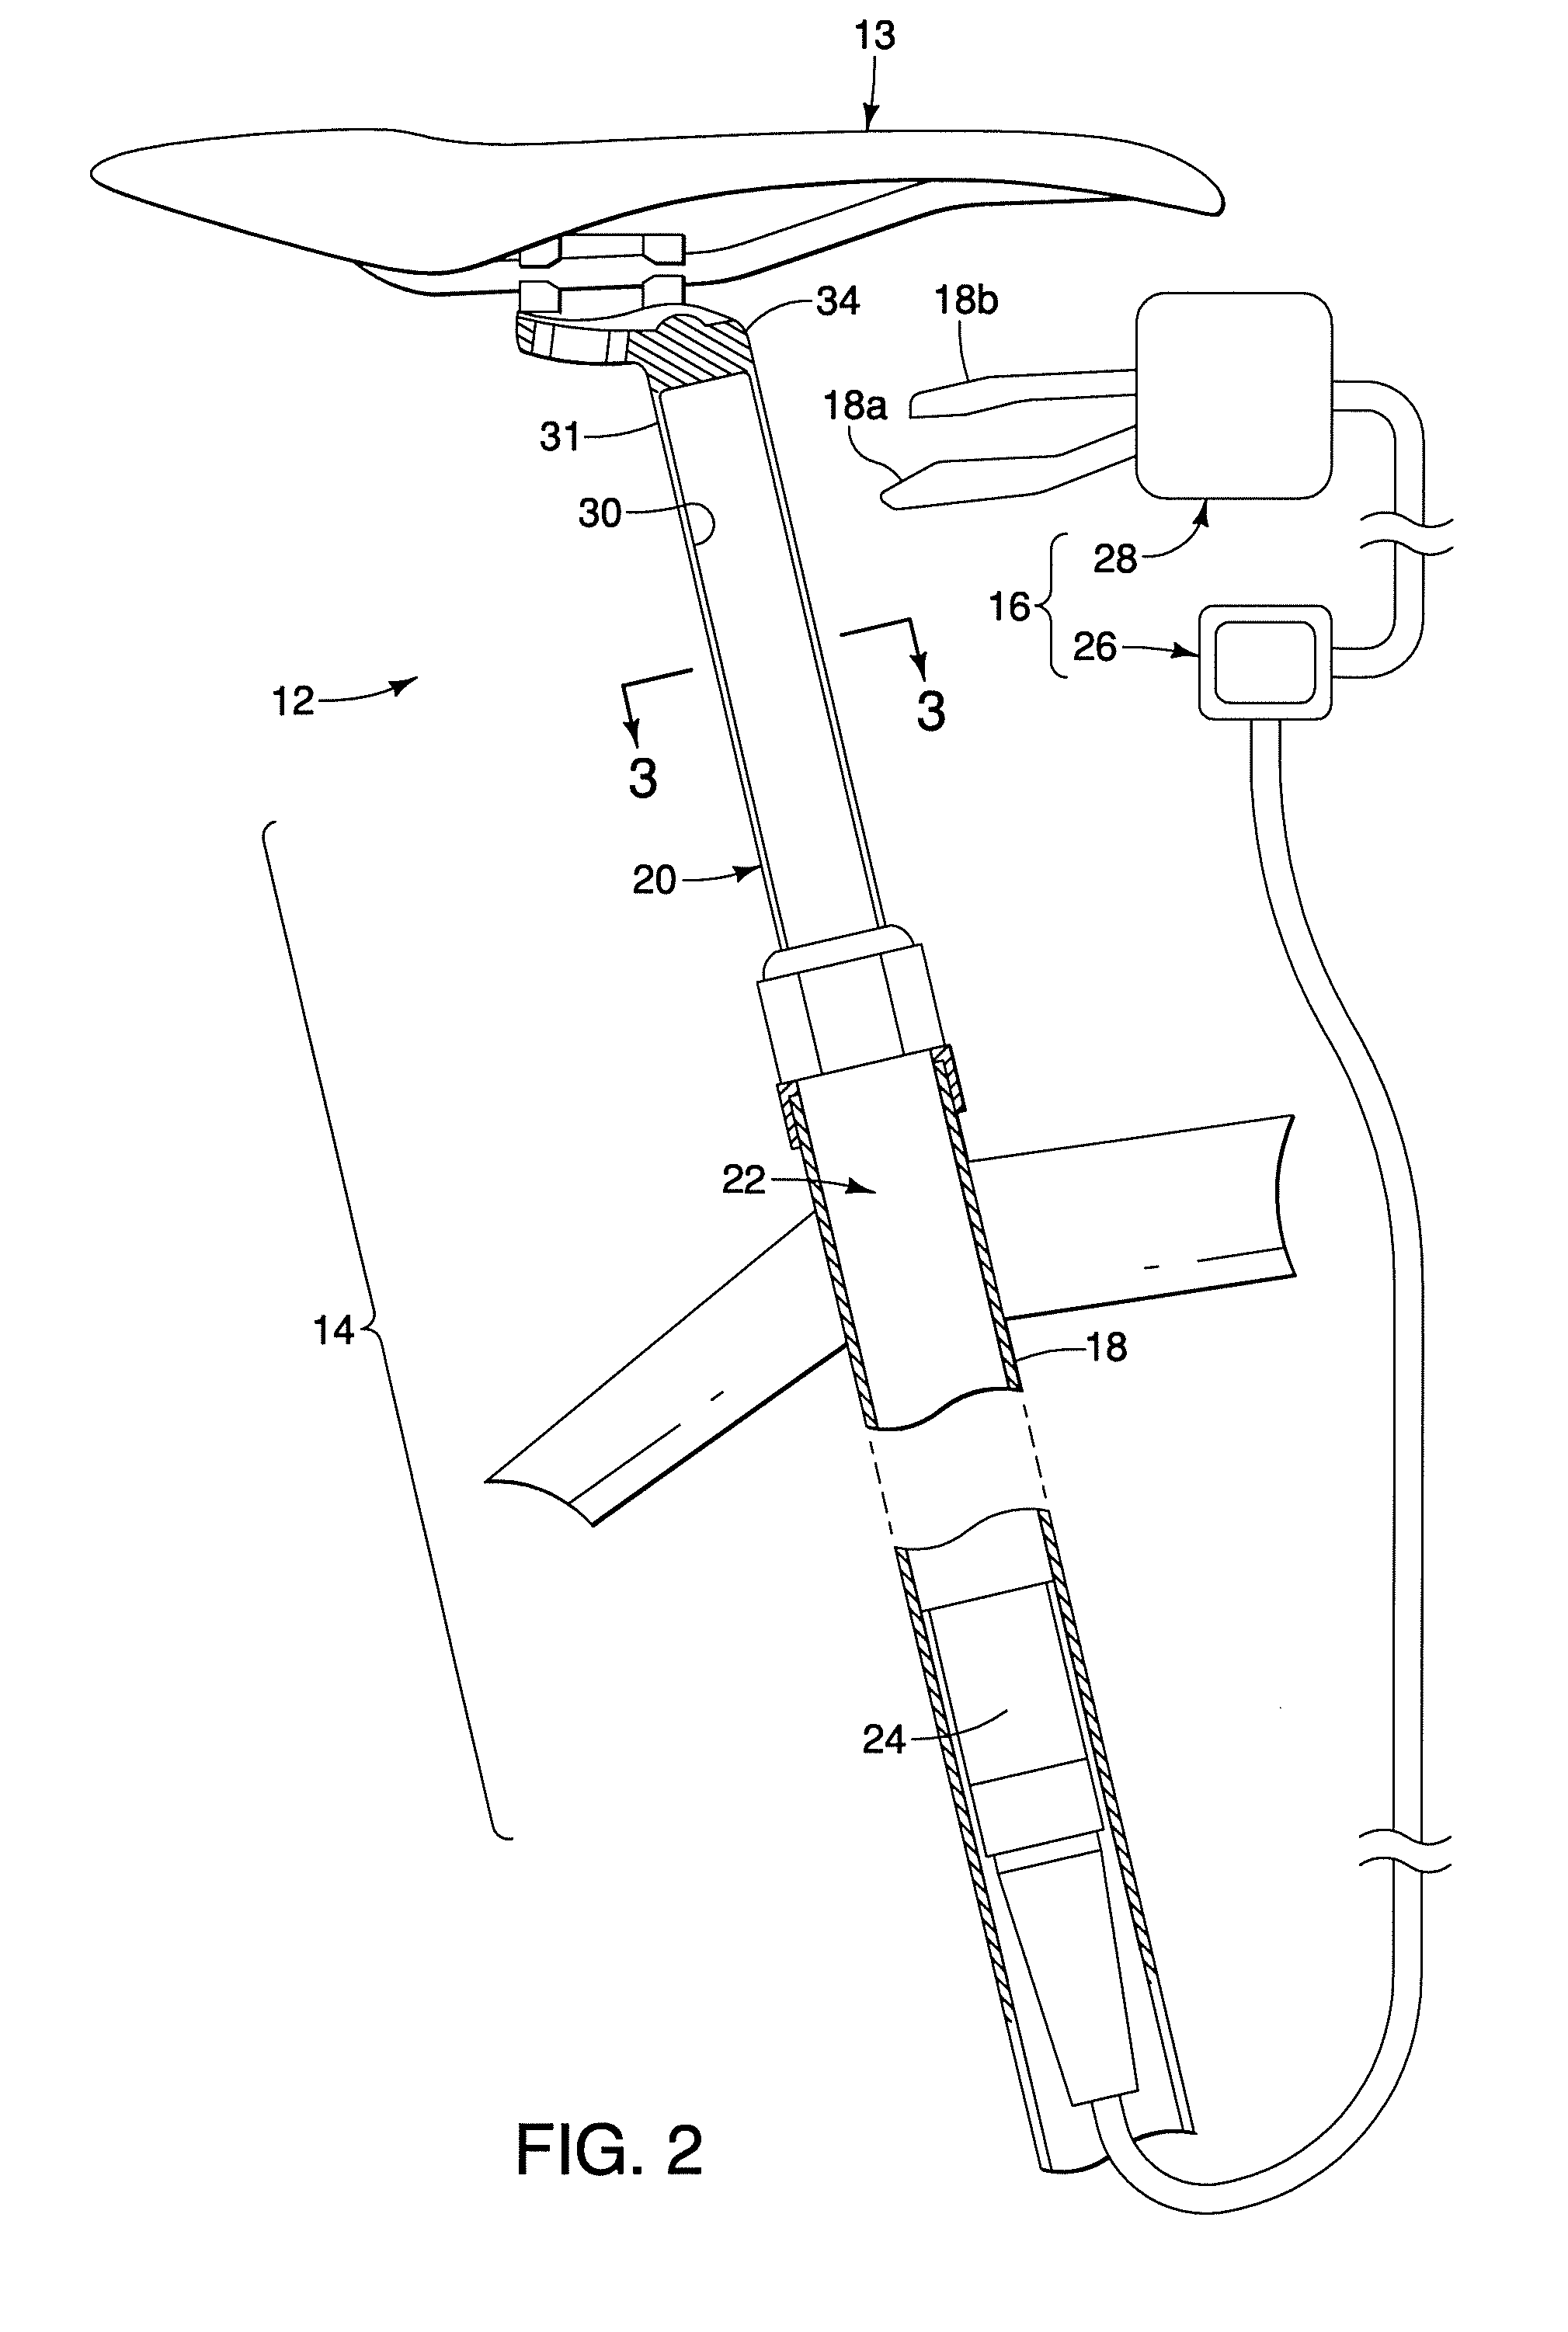 Height adjustable seatpost assembly